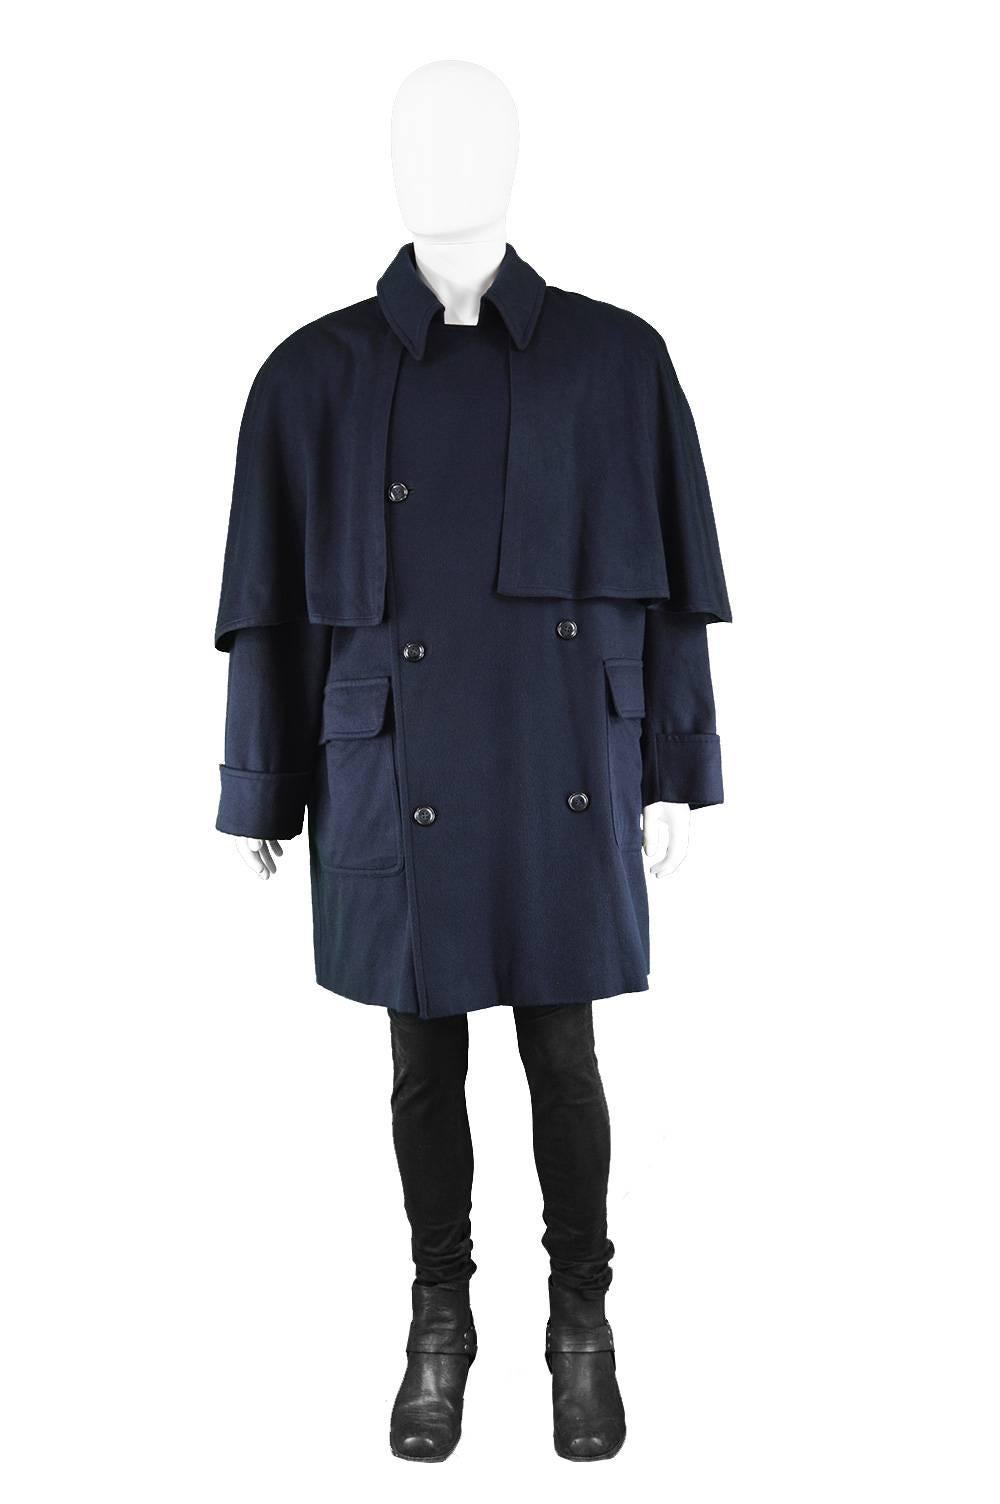 Valentino Boutique Men's Cashmere & Wool Vintage Cape Overcoat, 1980s

Size: Marked 50 which is roughly a modern men's Medium to Large but it has an intentionally loose, cape like fit so would also suit an XL. Would suit a taller man due to longer